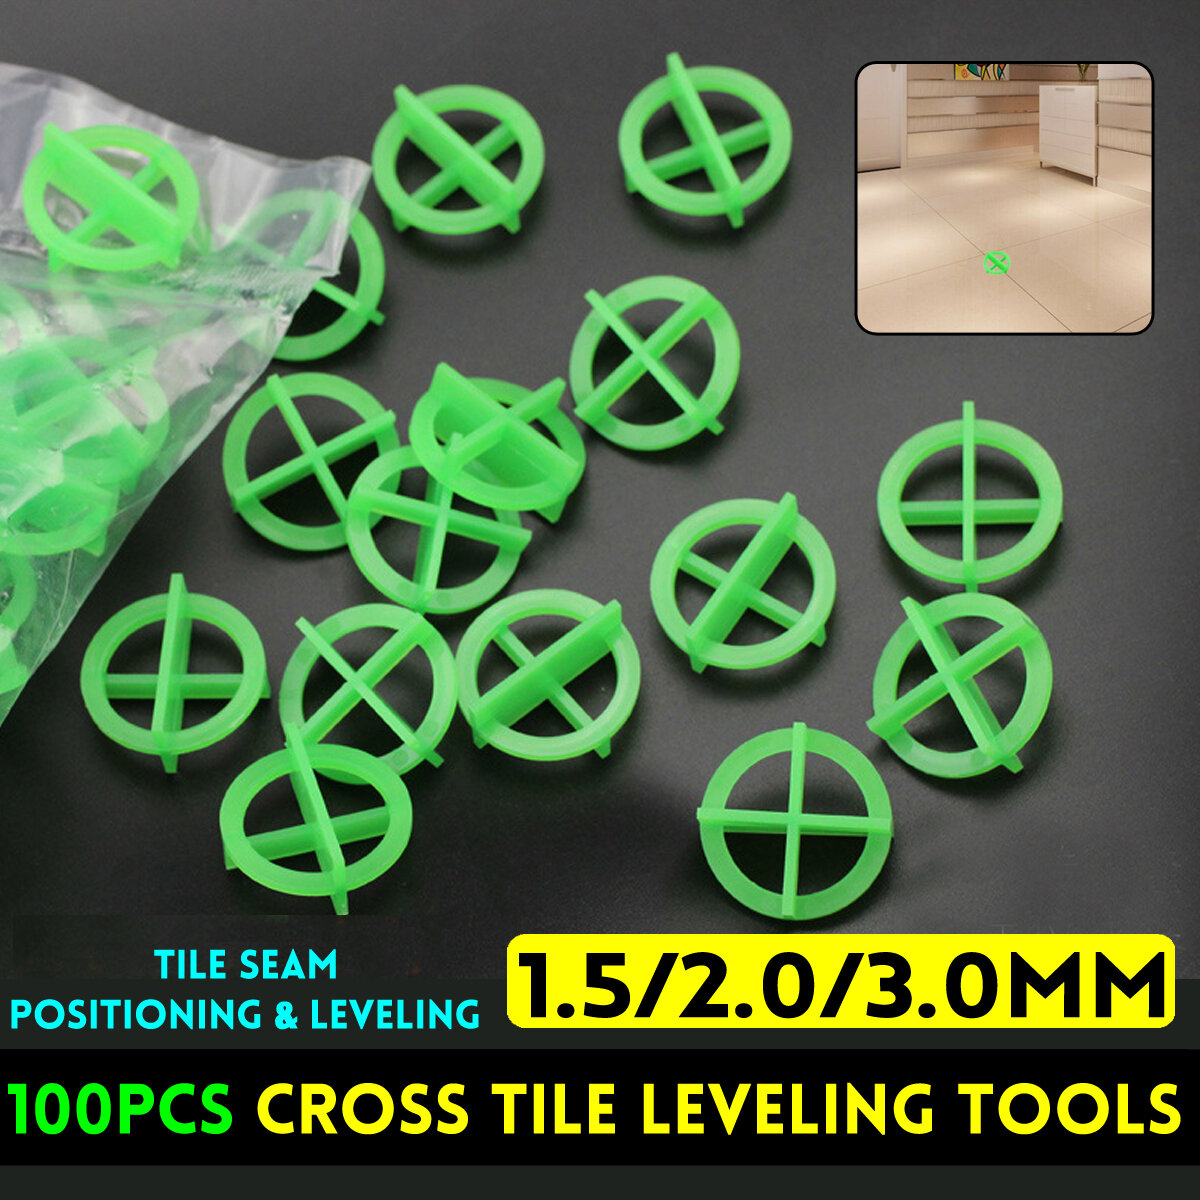 100Pcs Cross Tile Leveling System Base Spacer Recyclable Plastic Tools